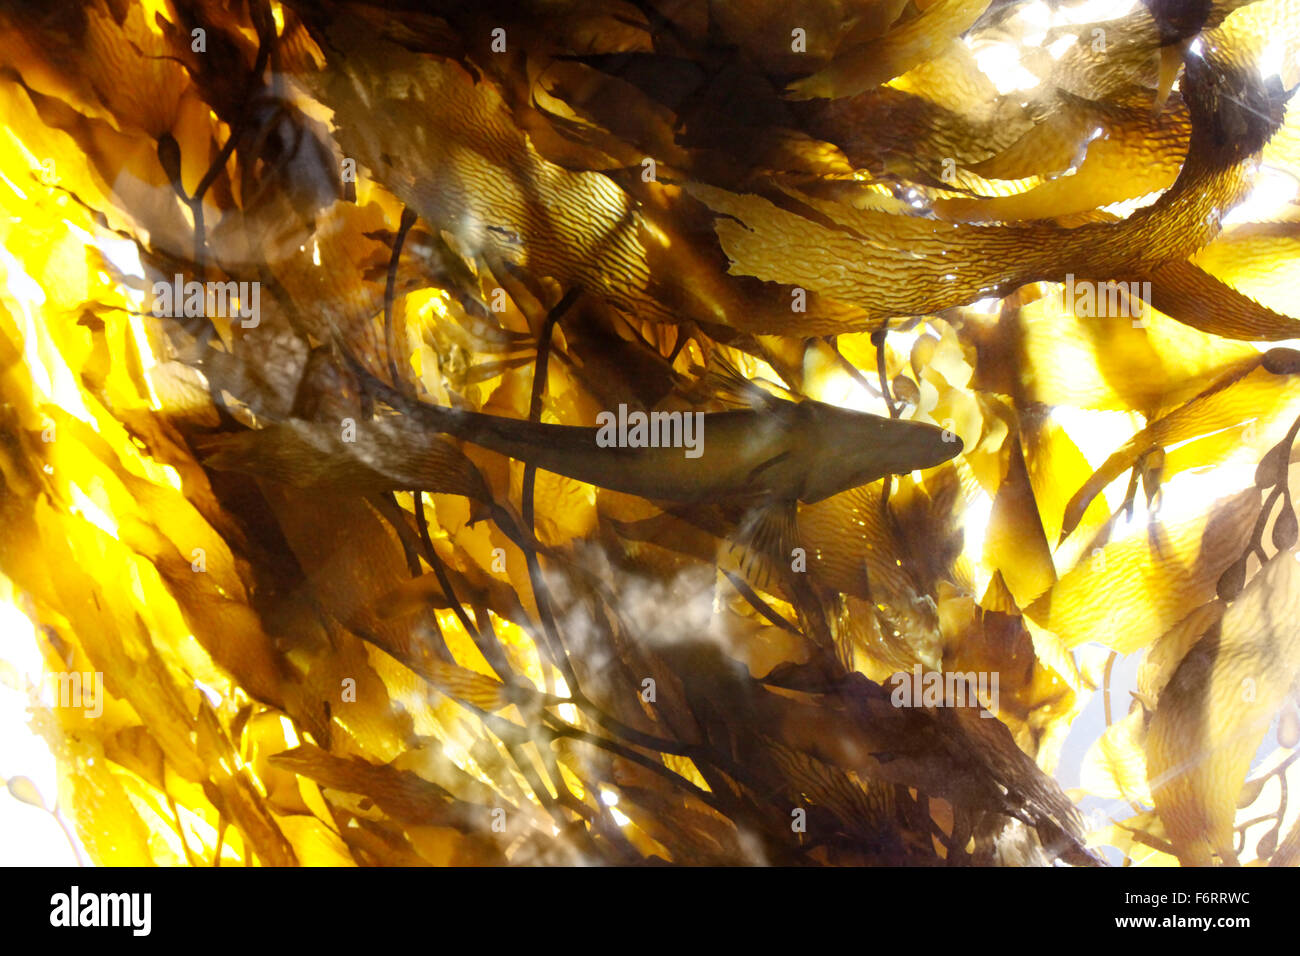 Fish swimming through a kelp forest Stock Photo